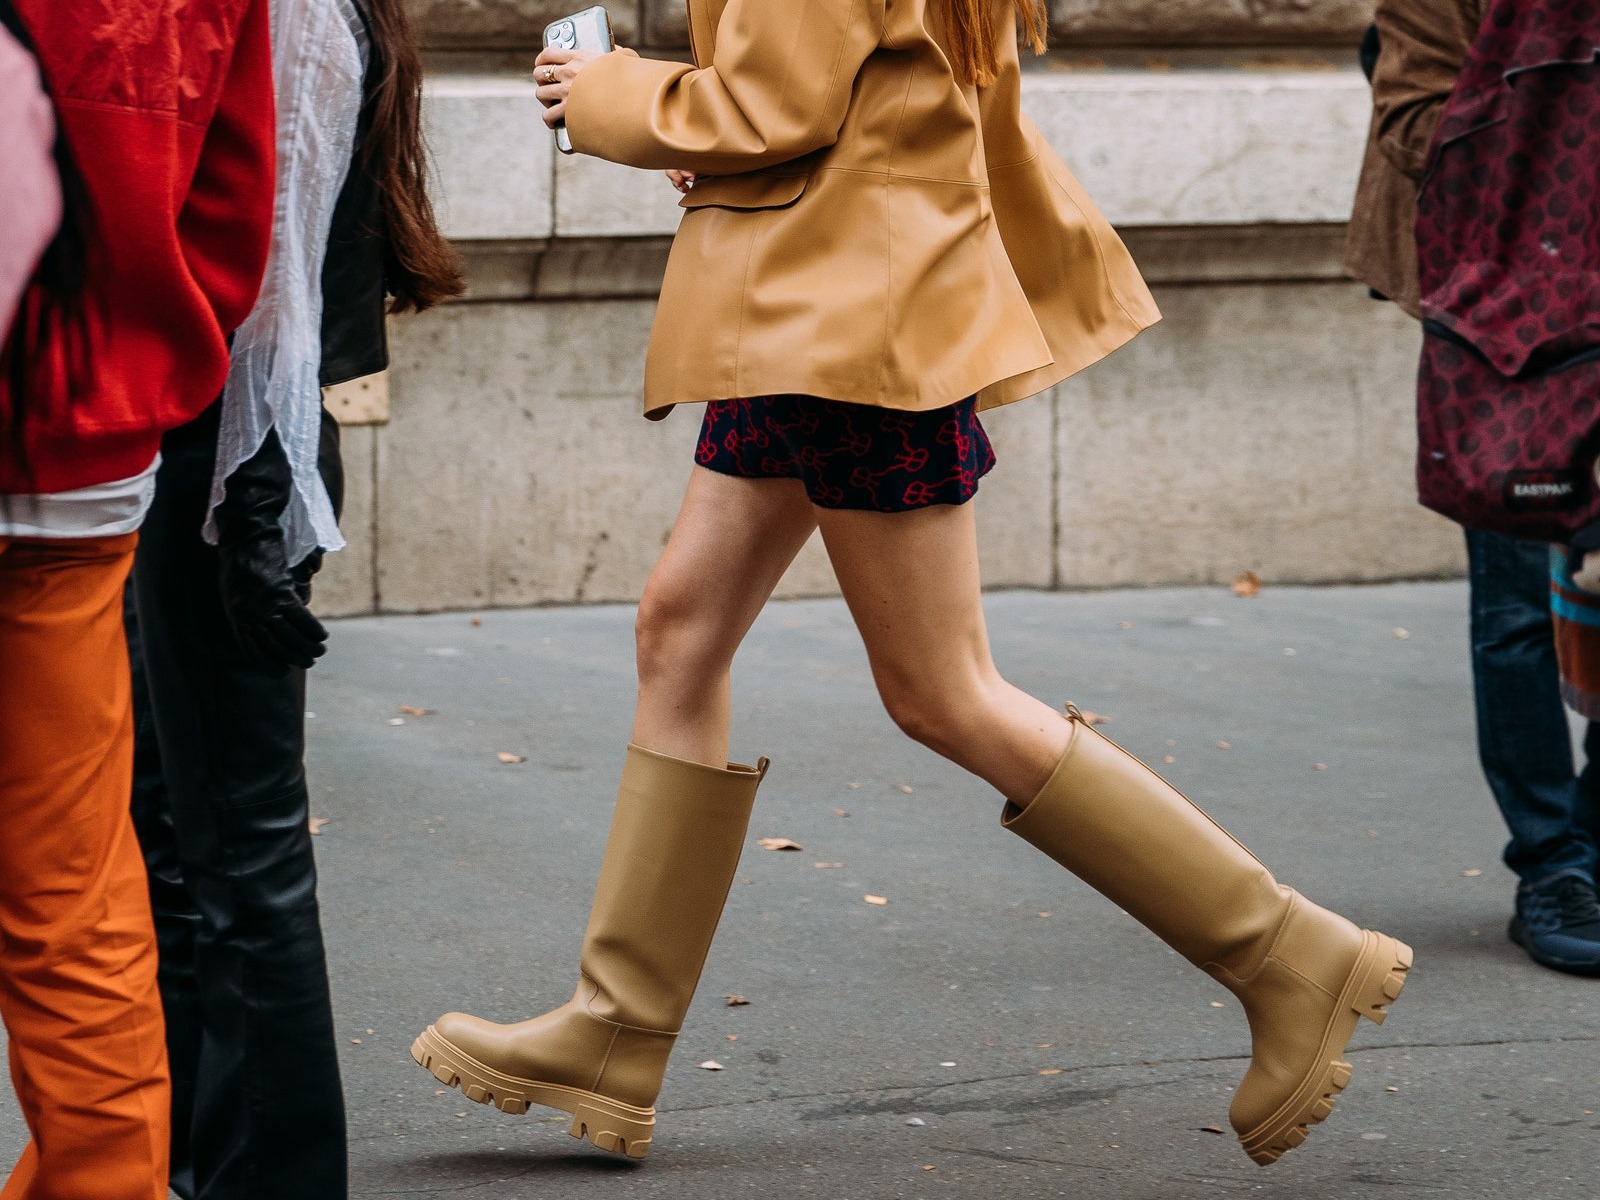 The Best Flat Boots for Women, from Knee-High to Ankle Height Styles